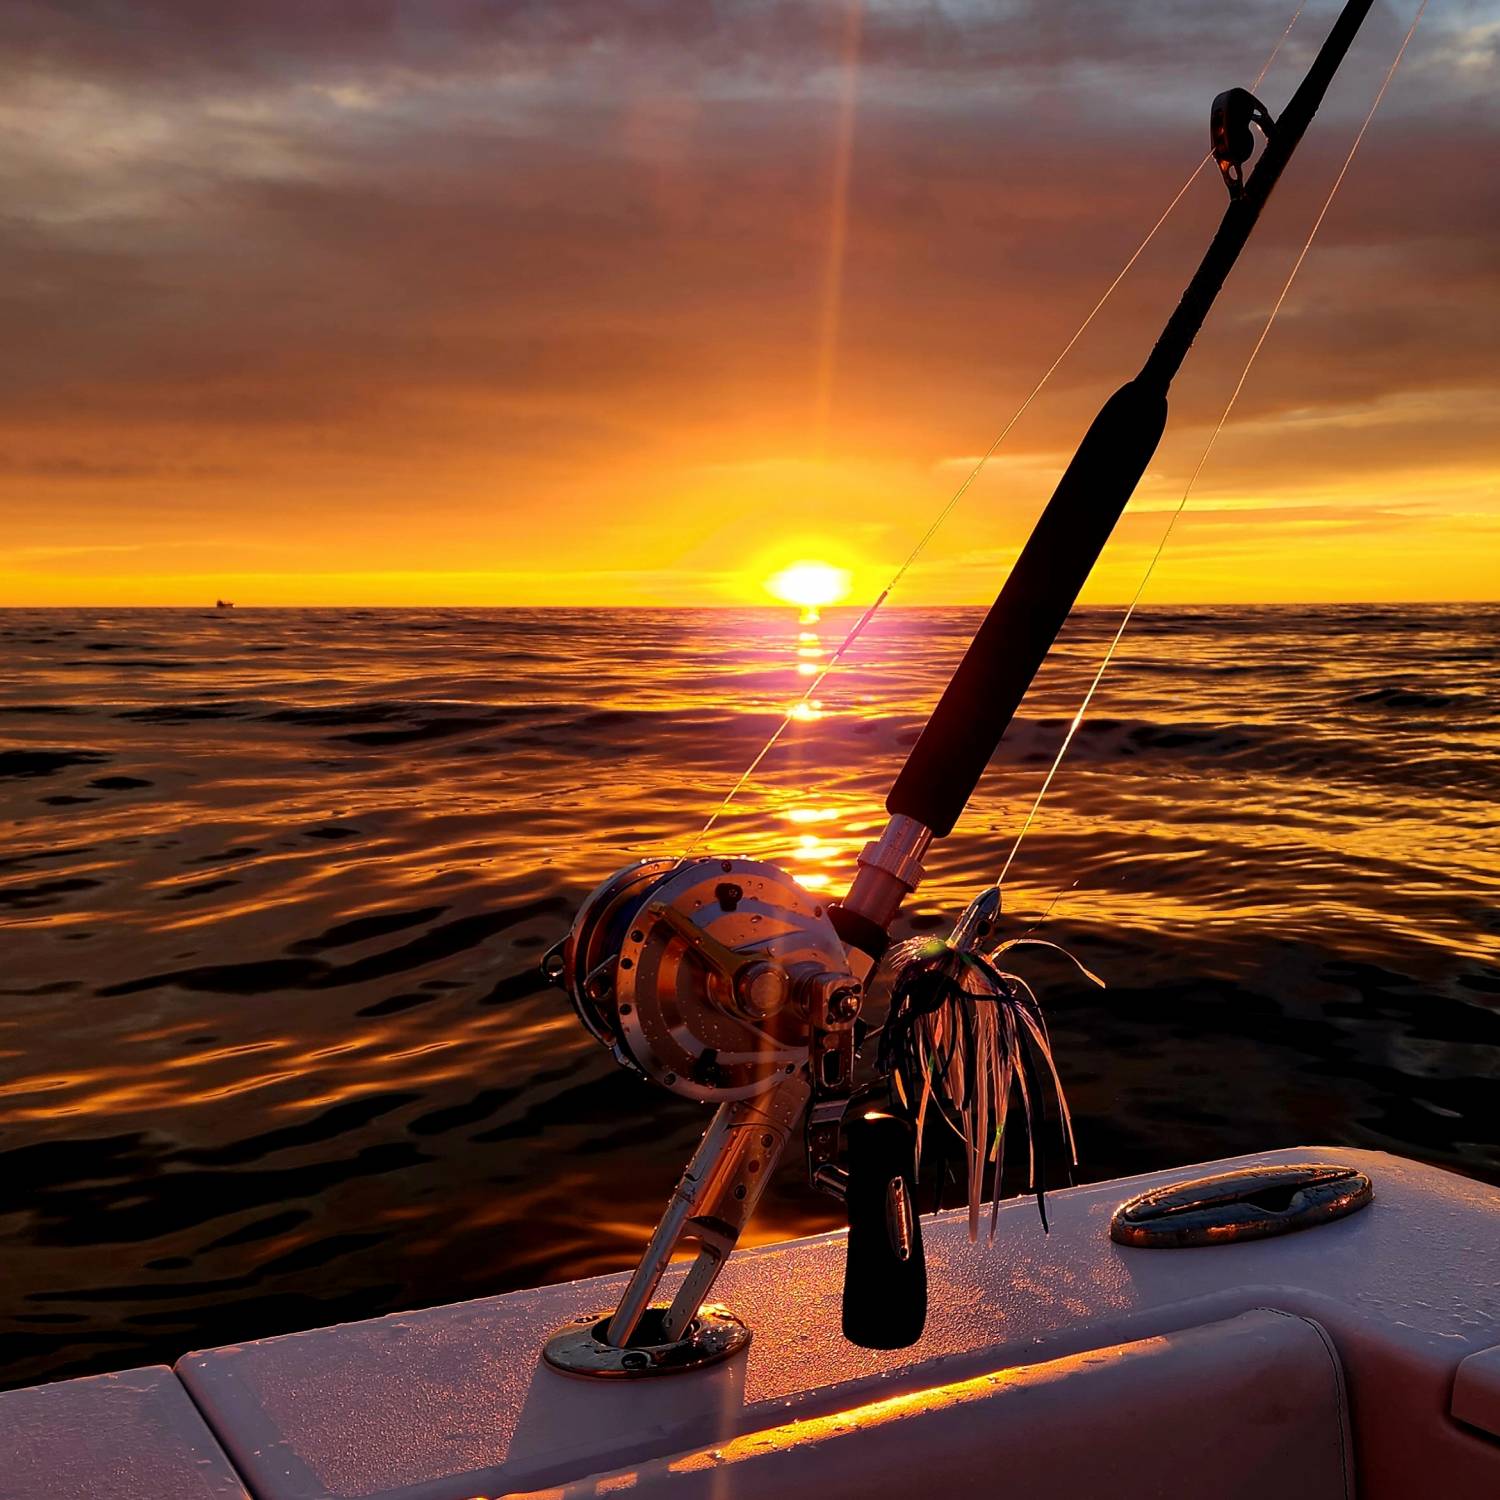 Title: Sportsman Sunrise 50 miles out - On board their Sportsman Open 302 Center Console - Location: 50 miles off Ocean City Maryland. Participating in the Photo Contest #SportsmanSeptember